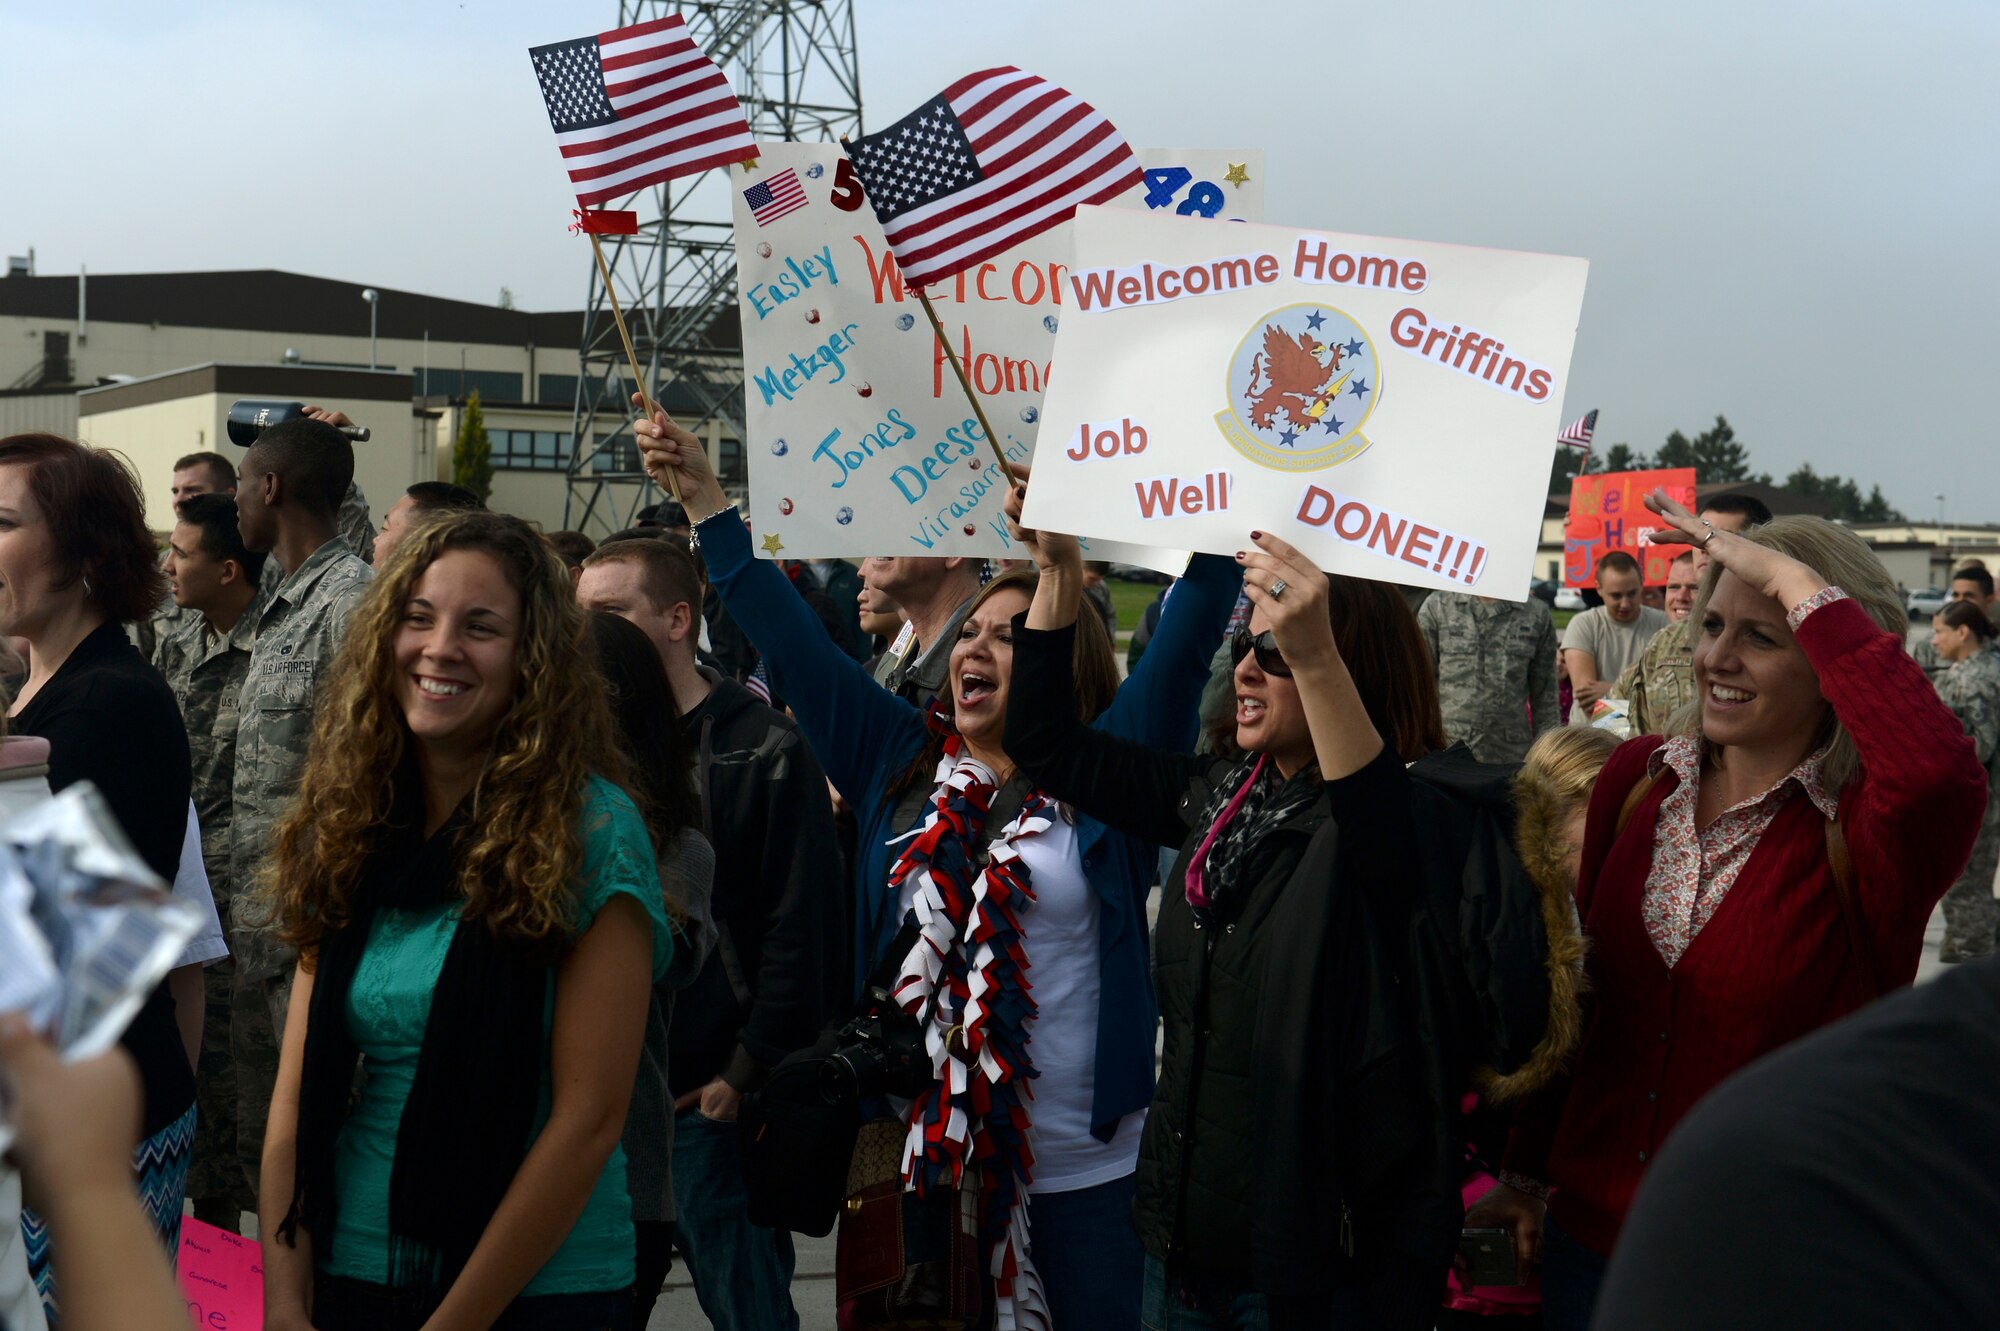 SPANGDAHLEM AIR BASE, Germany—Members of Saber Nation welcome home Airmen returning form deployment during the 480th Fighter Squadron and supporting squadron’s homecoming Sept. 23, 2013. The 480th FS is home to United States Air Forces in Europe's only Viper also known as the F-16 Block 50 squadron. (U.S. Air Force photo by Senior Airman Rusty Frank/Released)